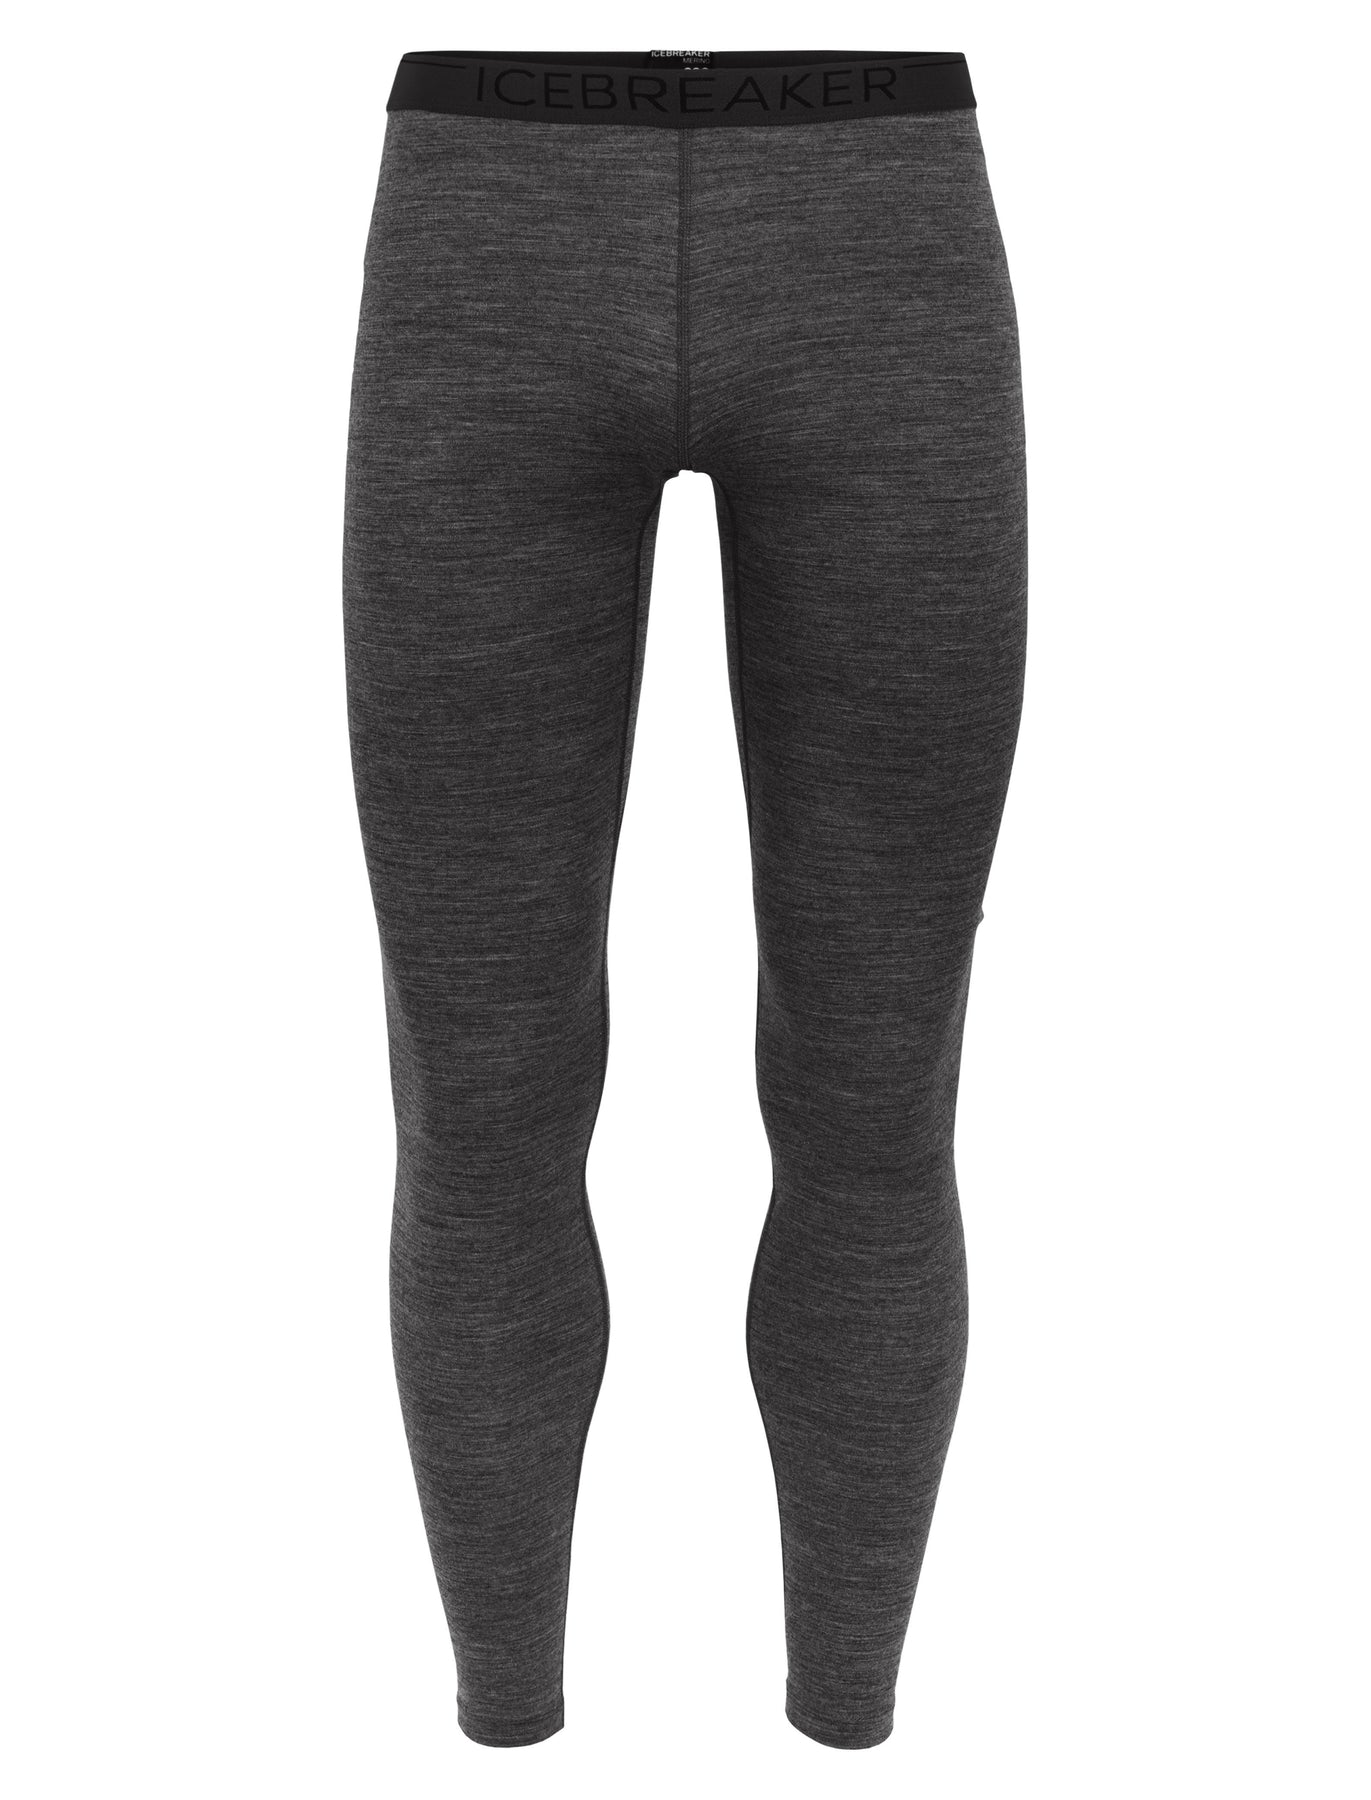 200 Oasis Leggings with Fly Men's – Château Mountain Sports